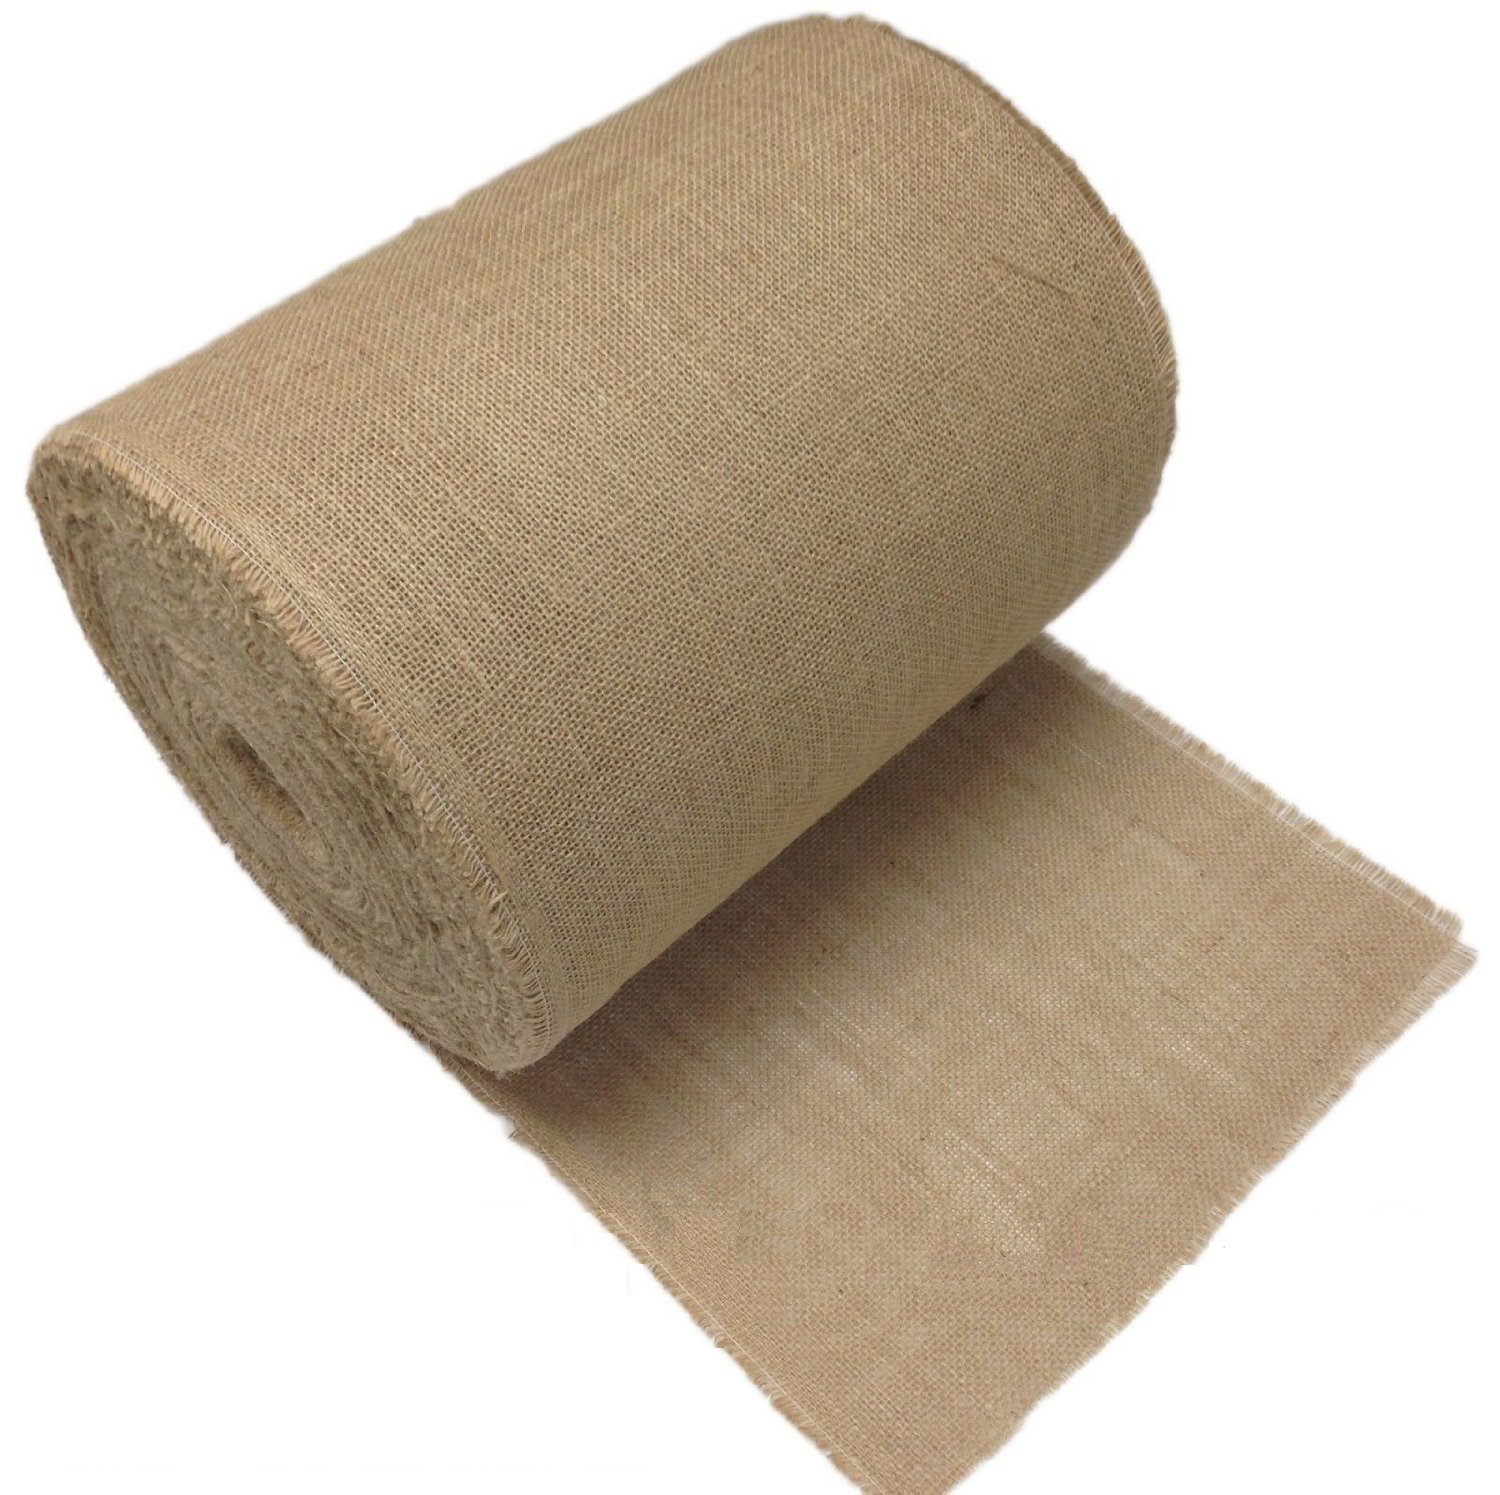 14" 50 Yard Sewn Edge Burlap Roll with Frayed Edges - Click Image to Close